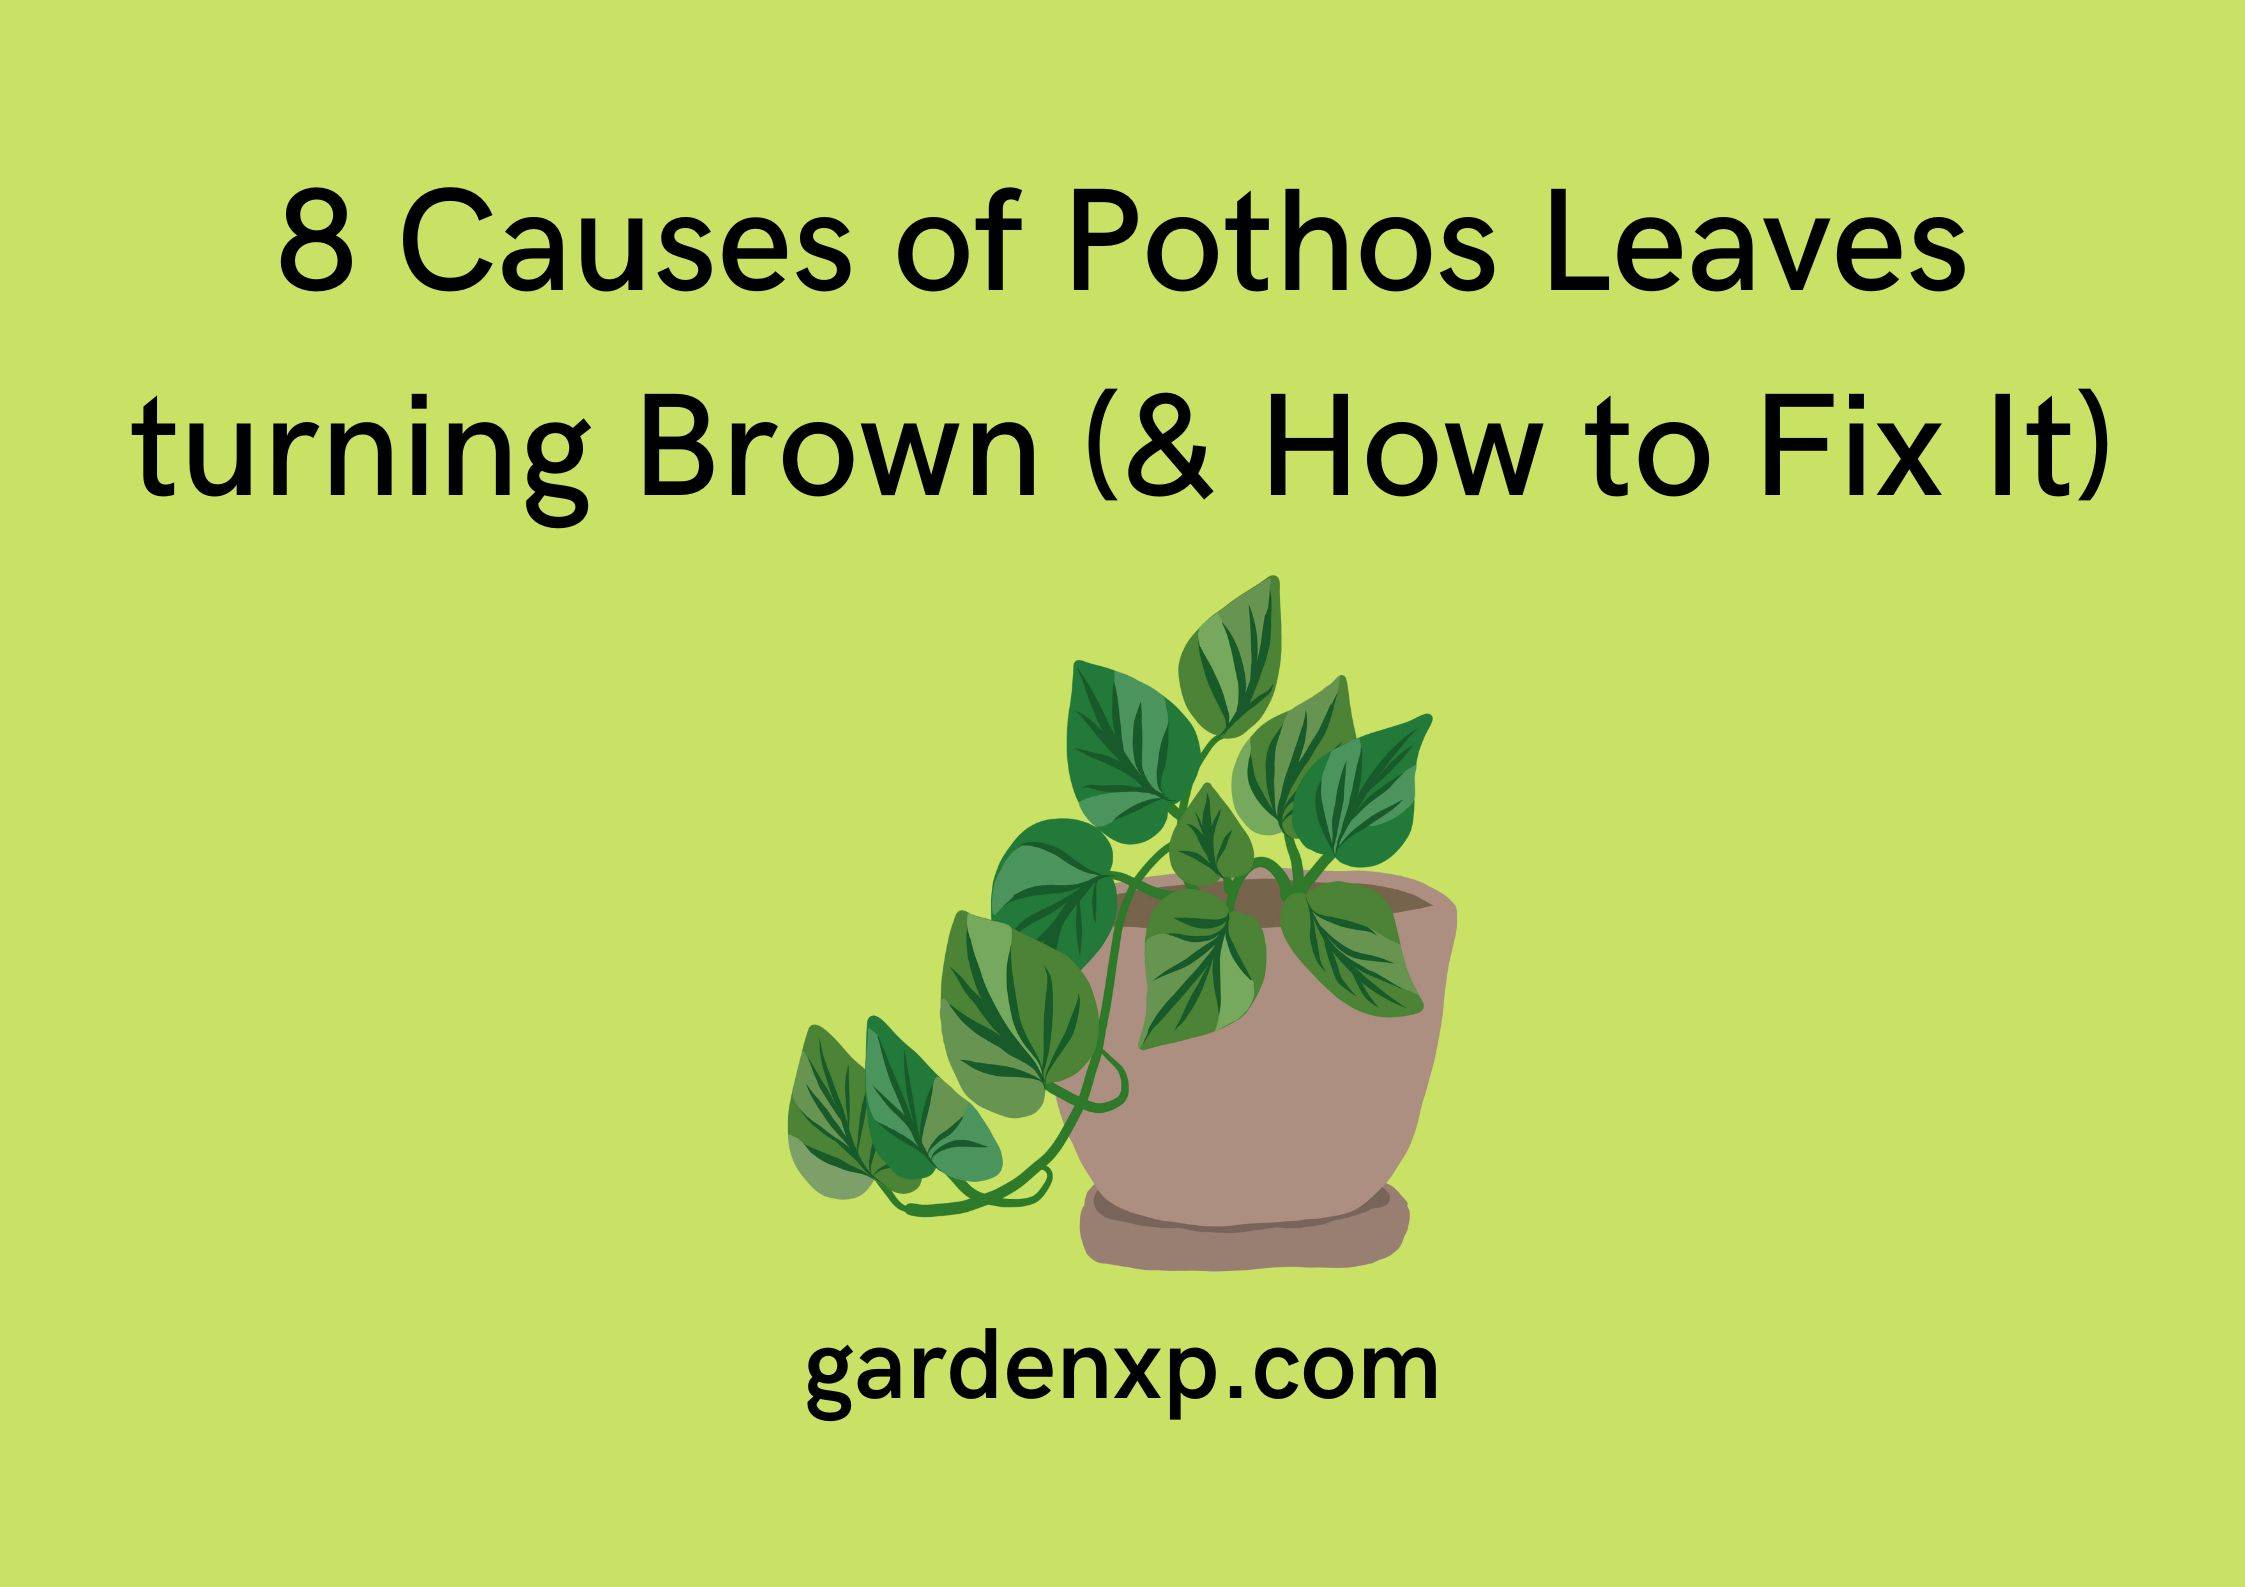 8 Causes of Pothos Leaves turning Brown (& How to Fix It)